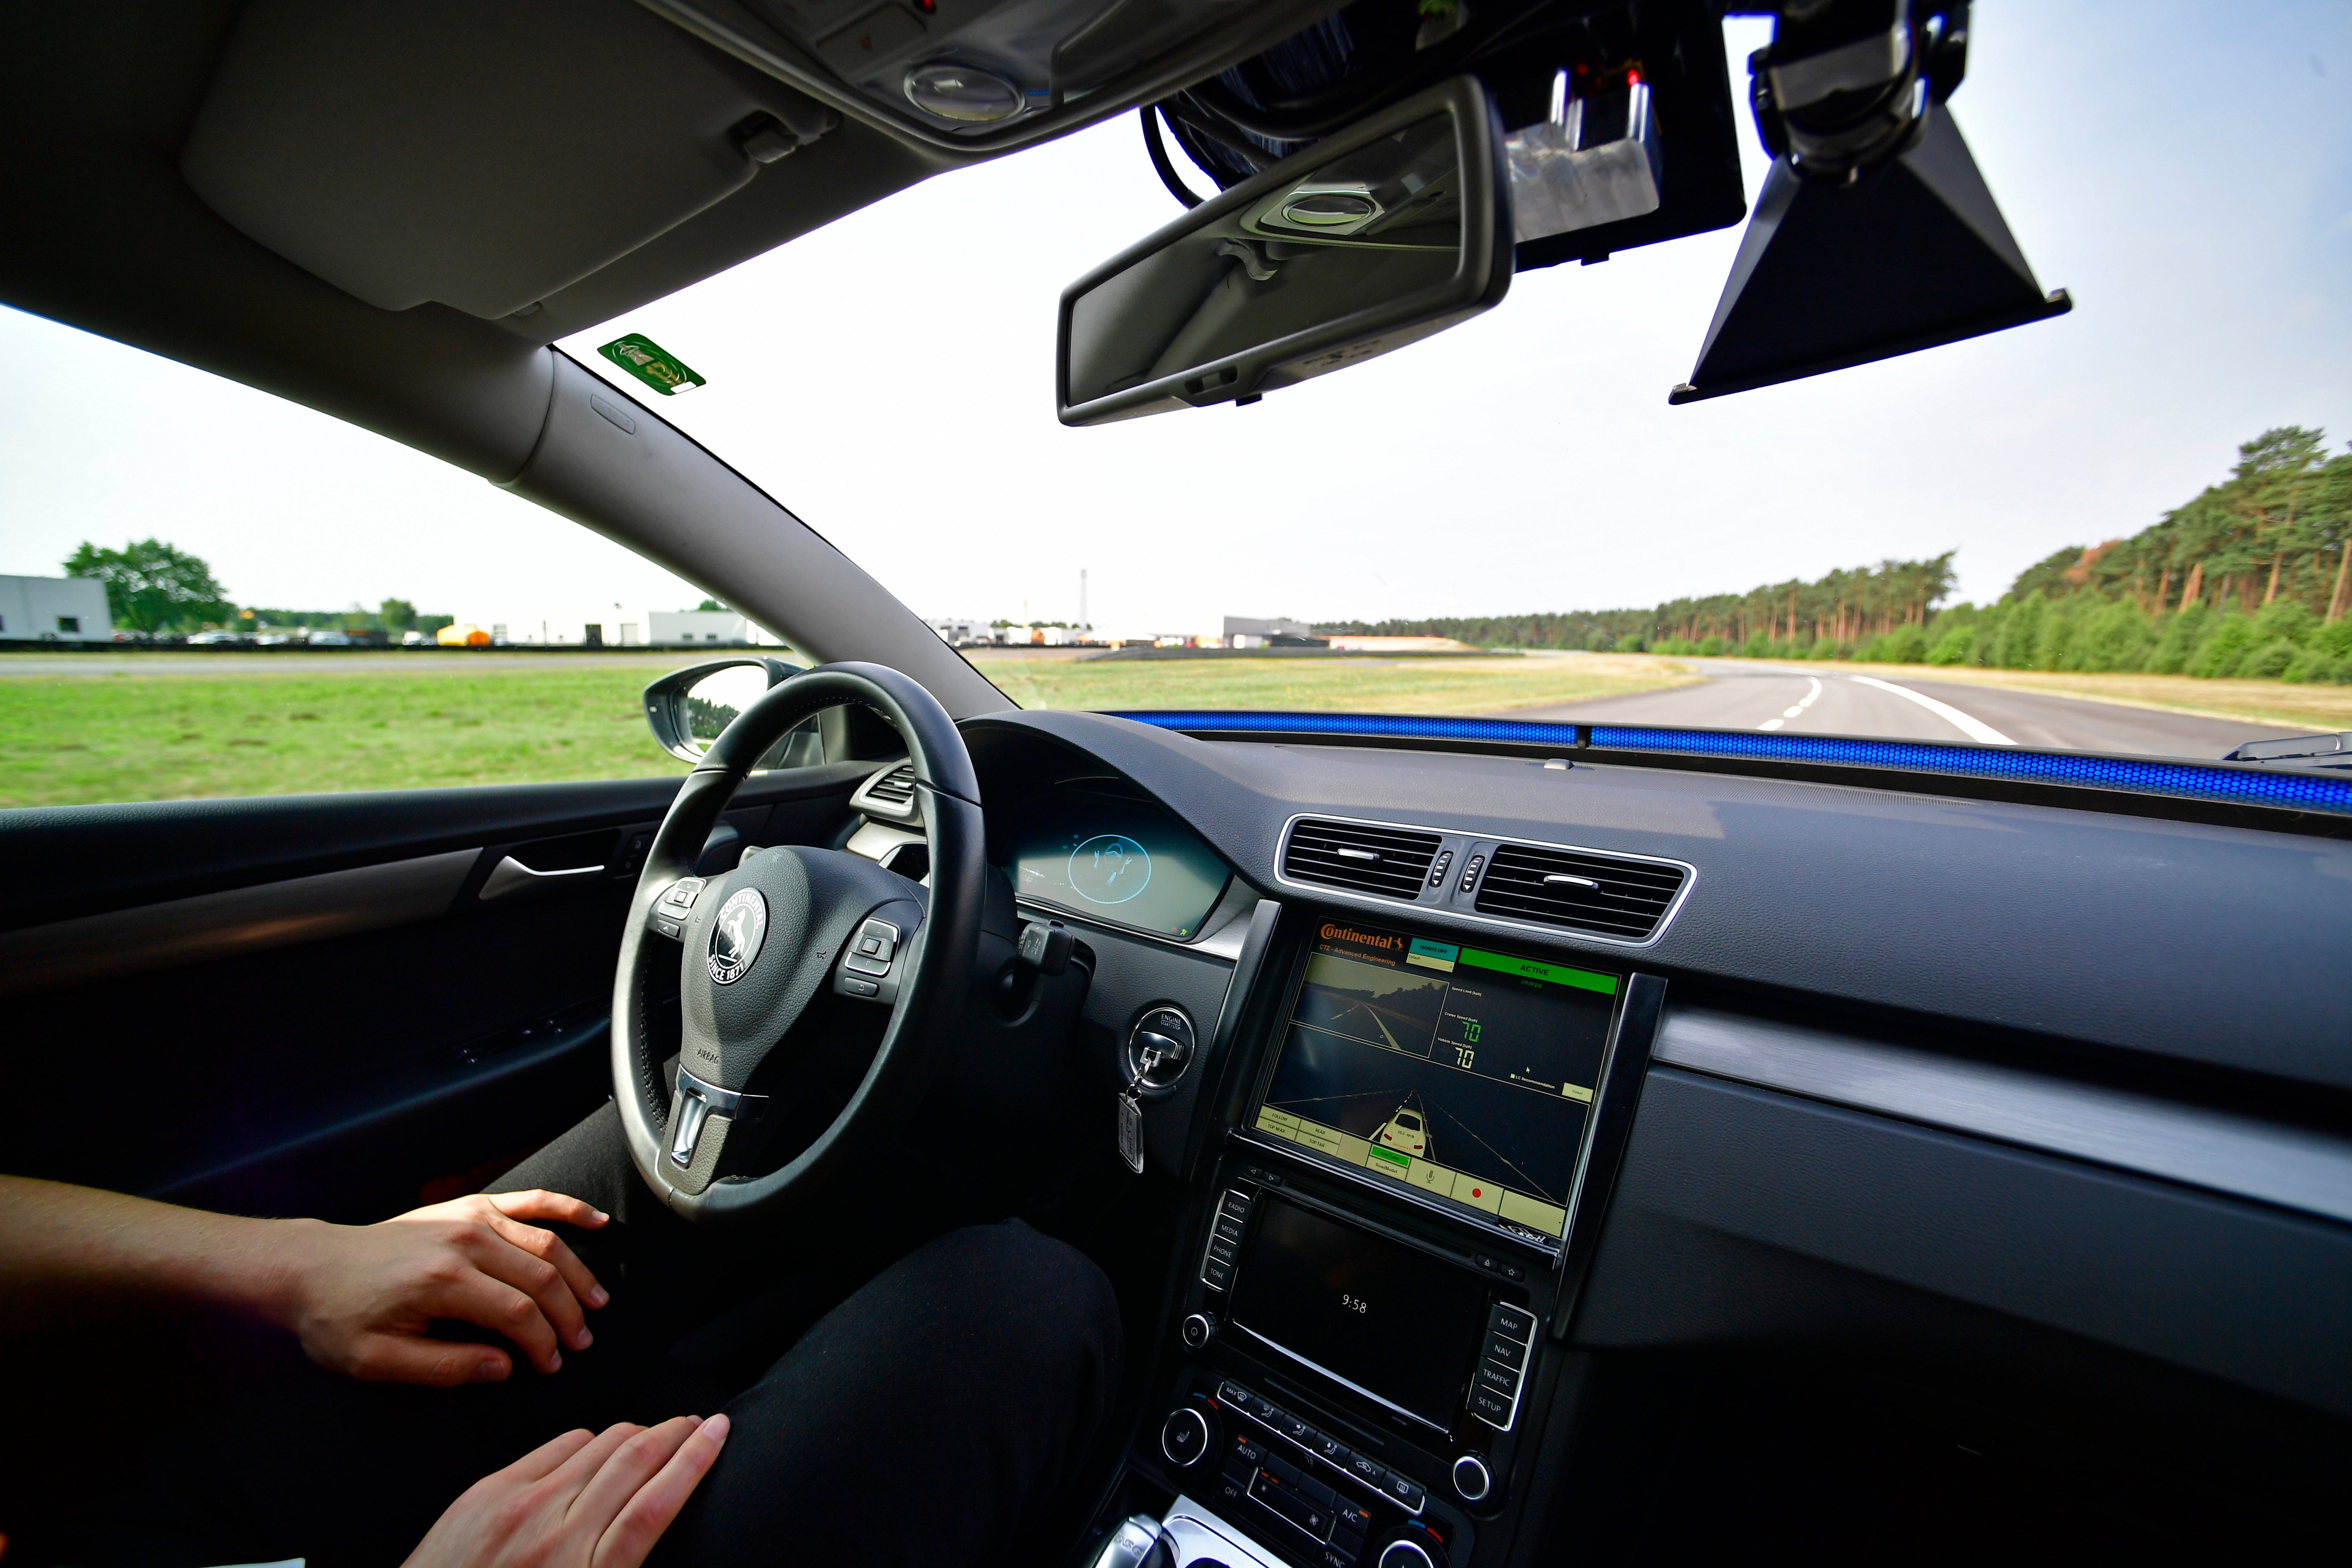 The DfT announced in April 2021 it would allow hands-free driving in vehicles with lane-keeping technology on congested motorways